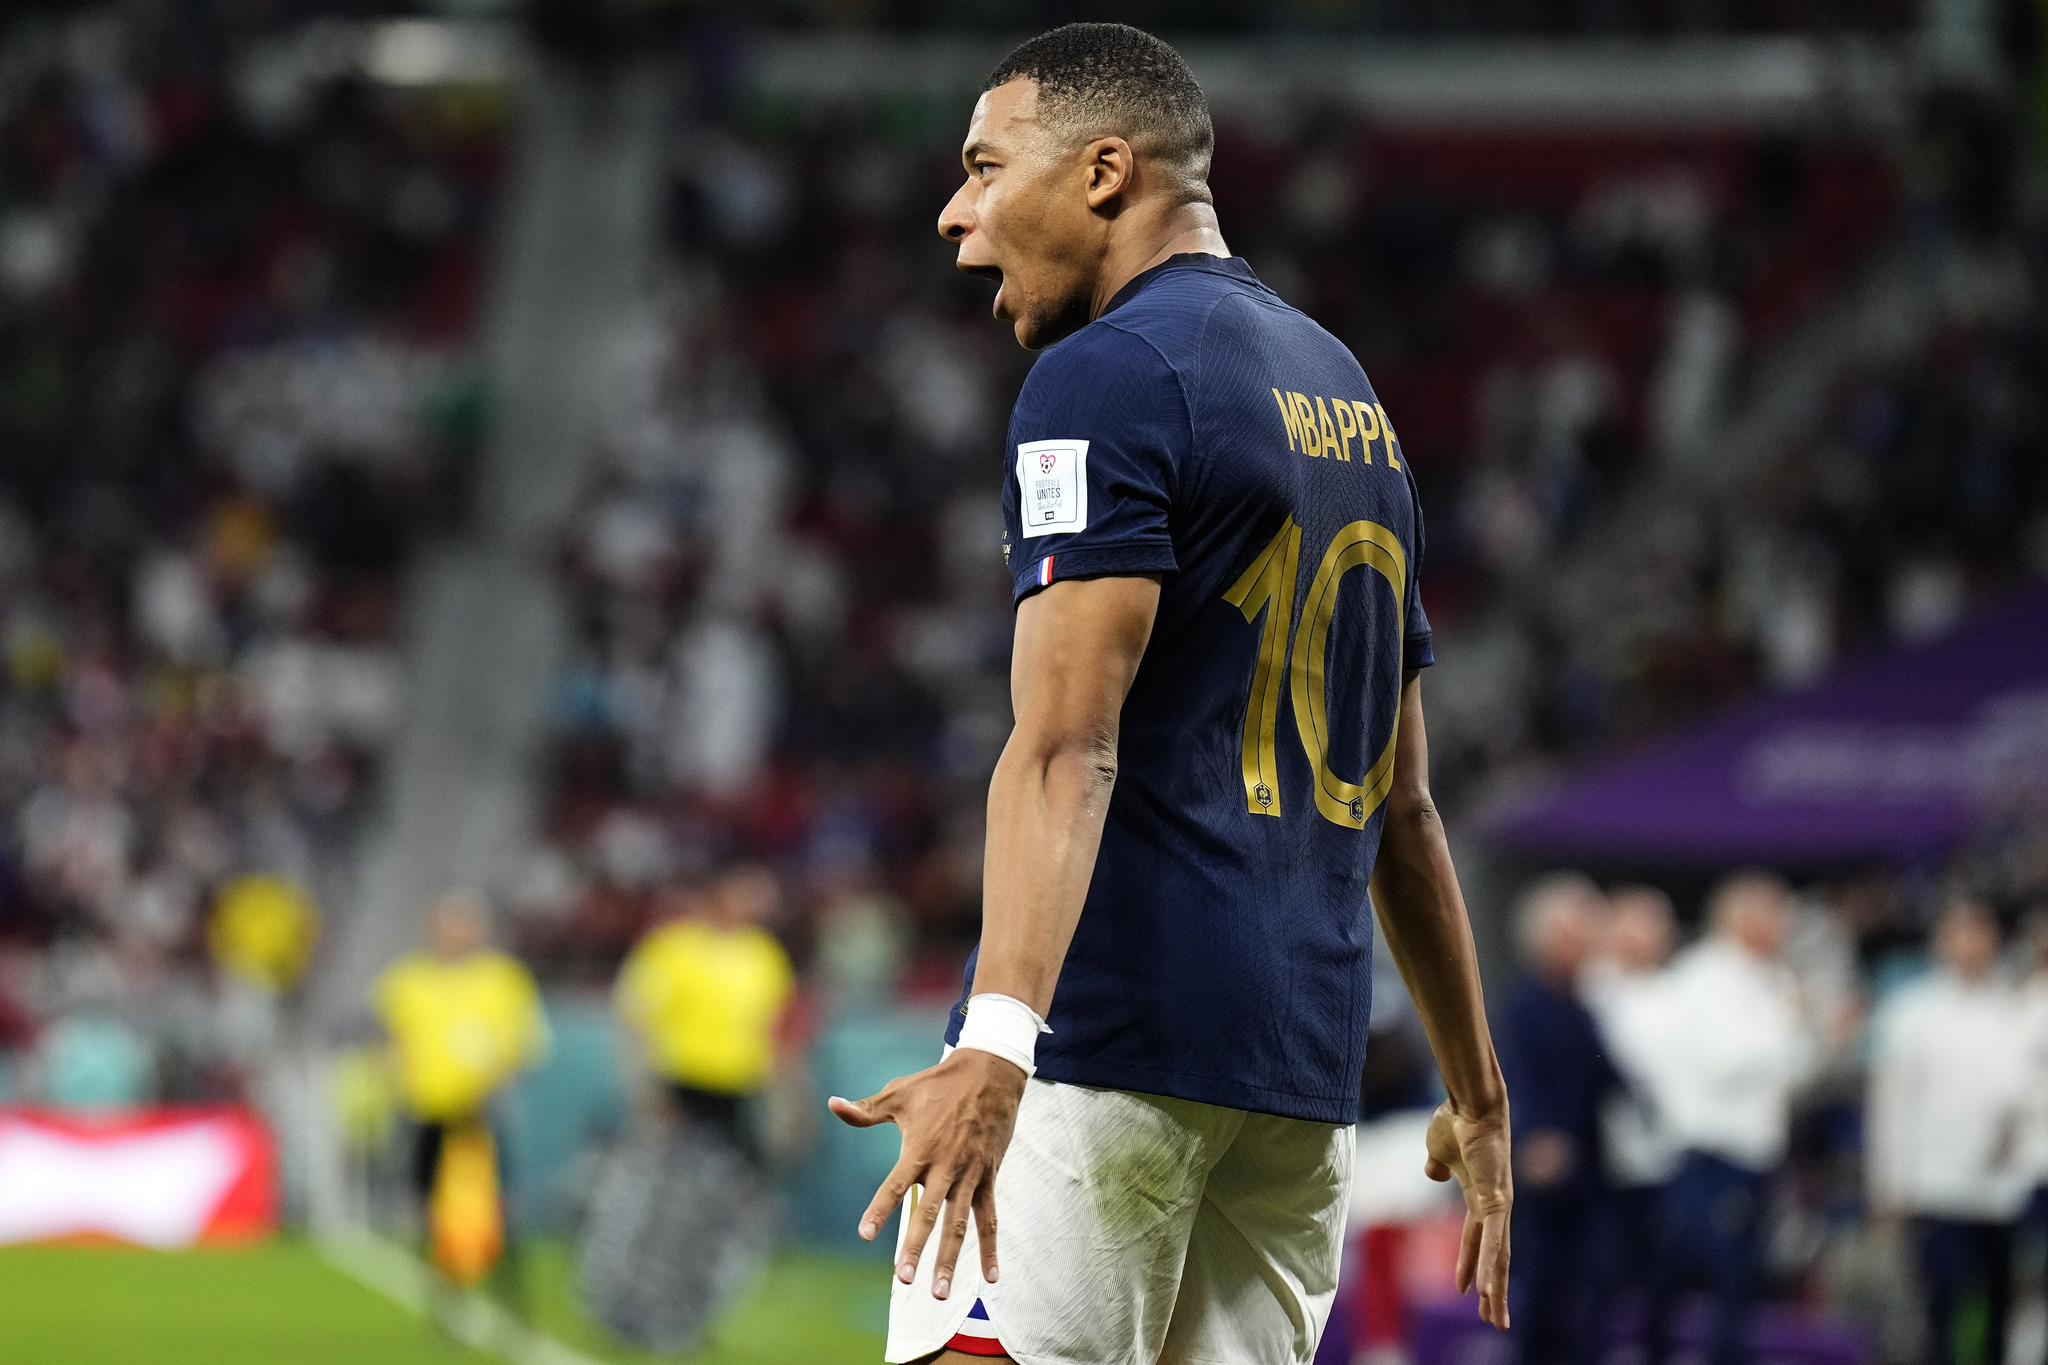 France's Kylian  lt;HIT gt;Mbappe lt;/HIT gt; celebrates scoring his side's third goal during the World Cup round of 16 soccer match between France and Poland, at the Al Thumama Stadium in Doha, Qatar, Sunday, Dec. 4, 2022. (AP Photo/Martin Meissner)